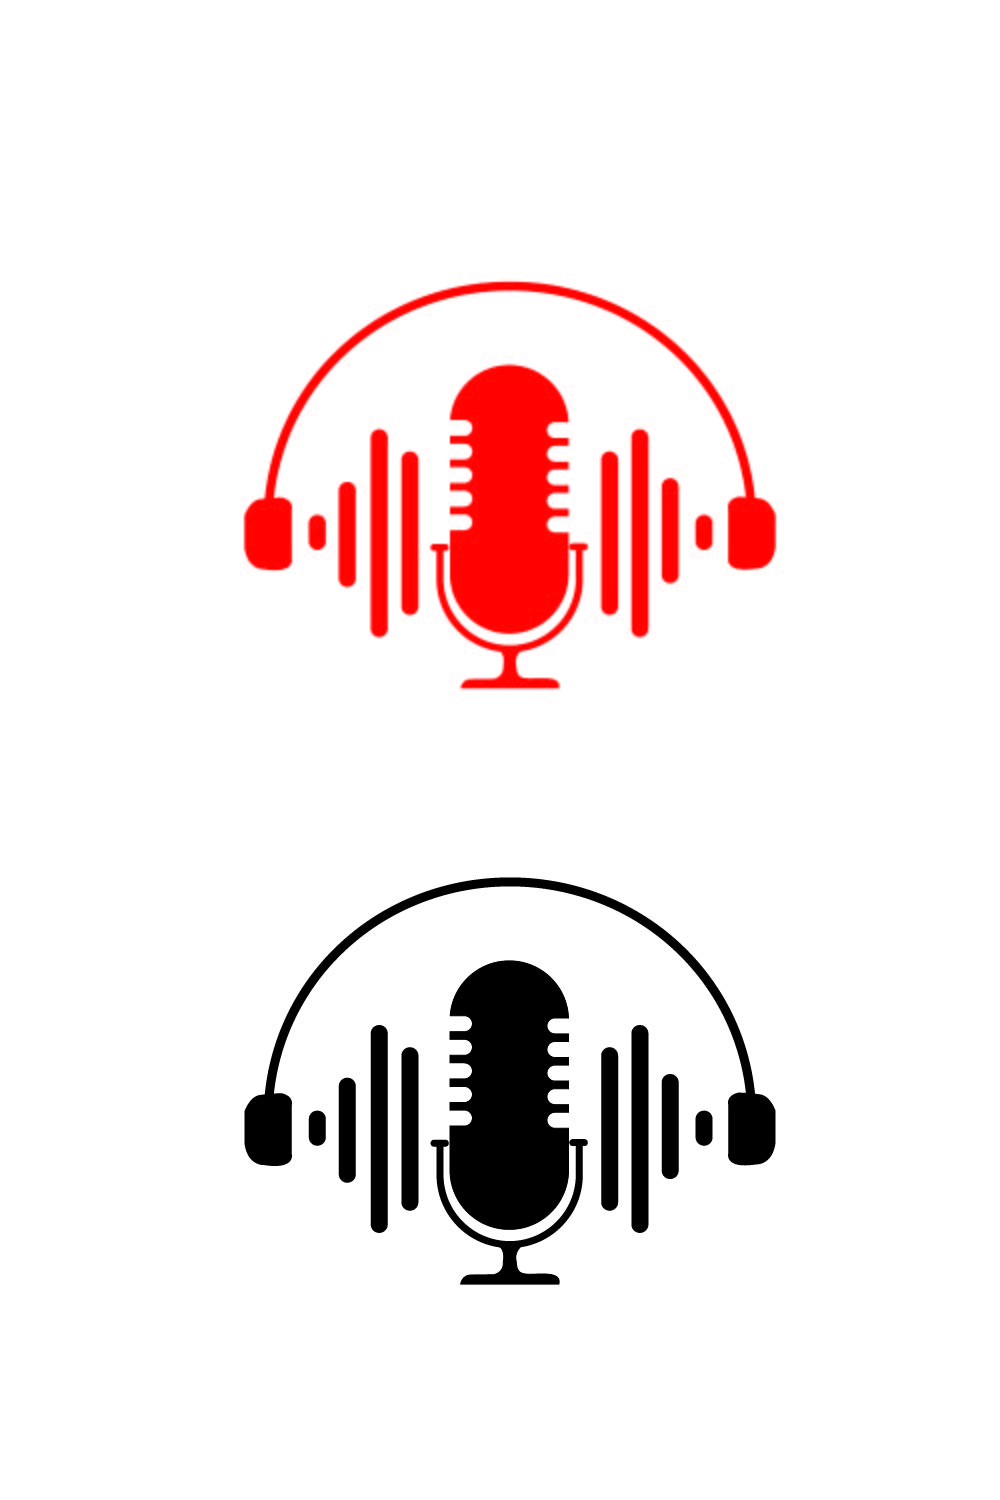 Prodcast logo in vector form pinterest preview image.